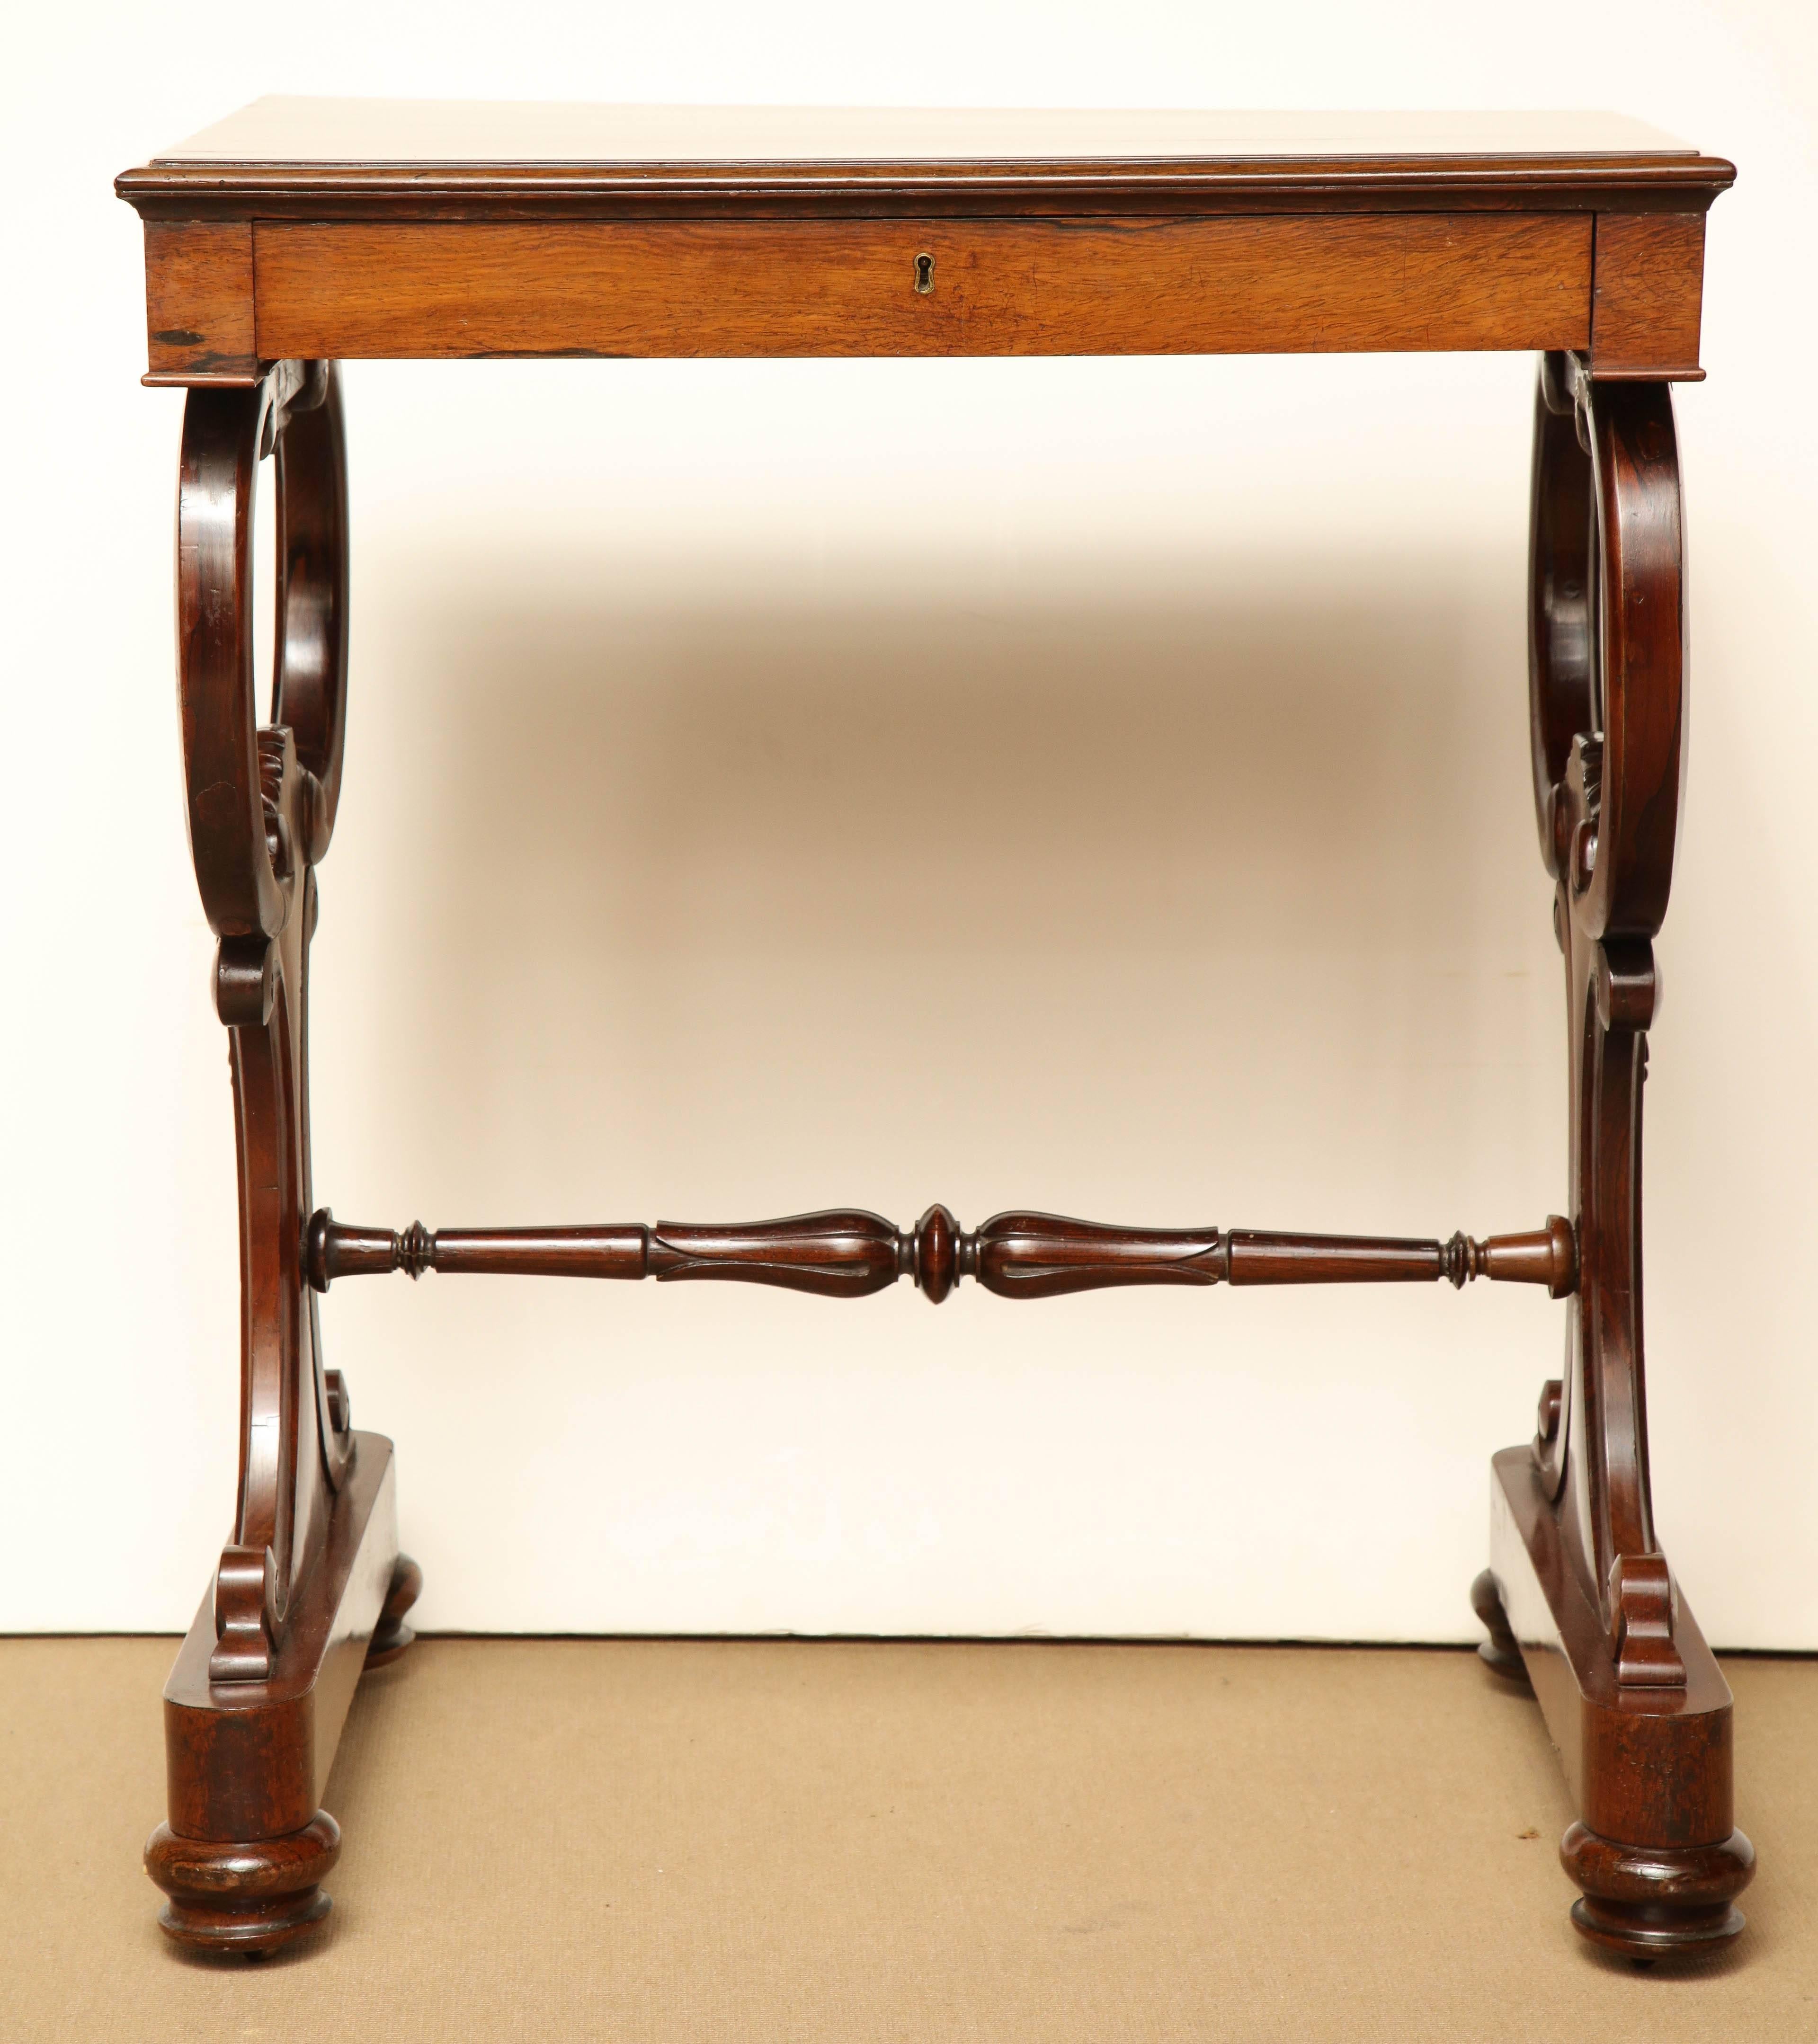 Mid-19th century English worktable with fitted drawer in goncalo alves.